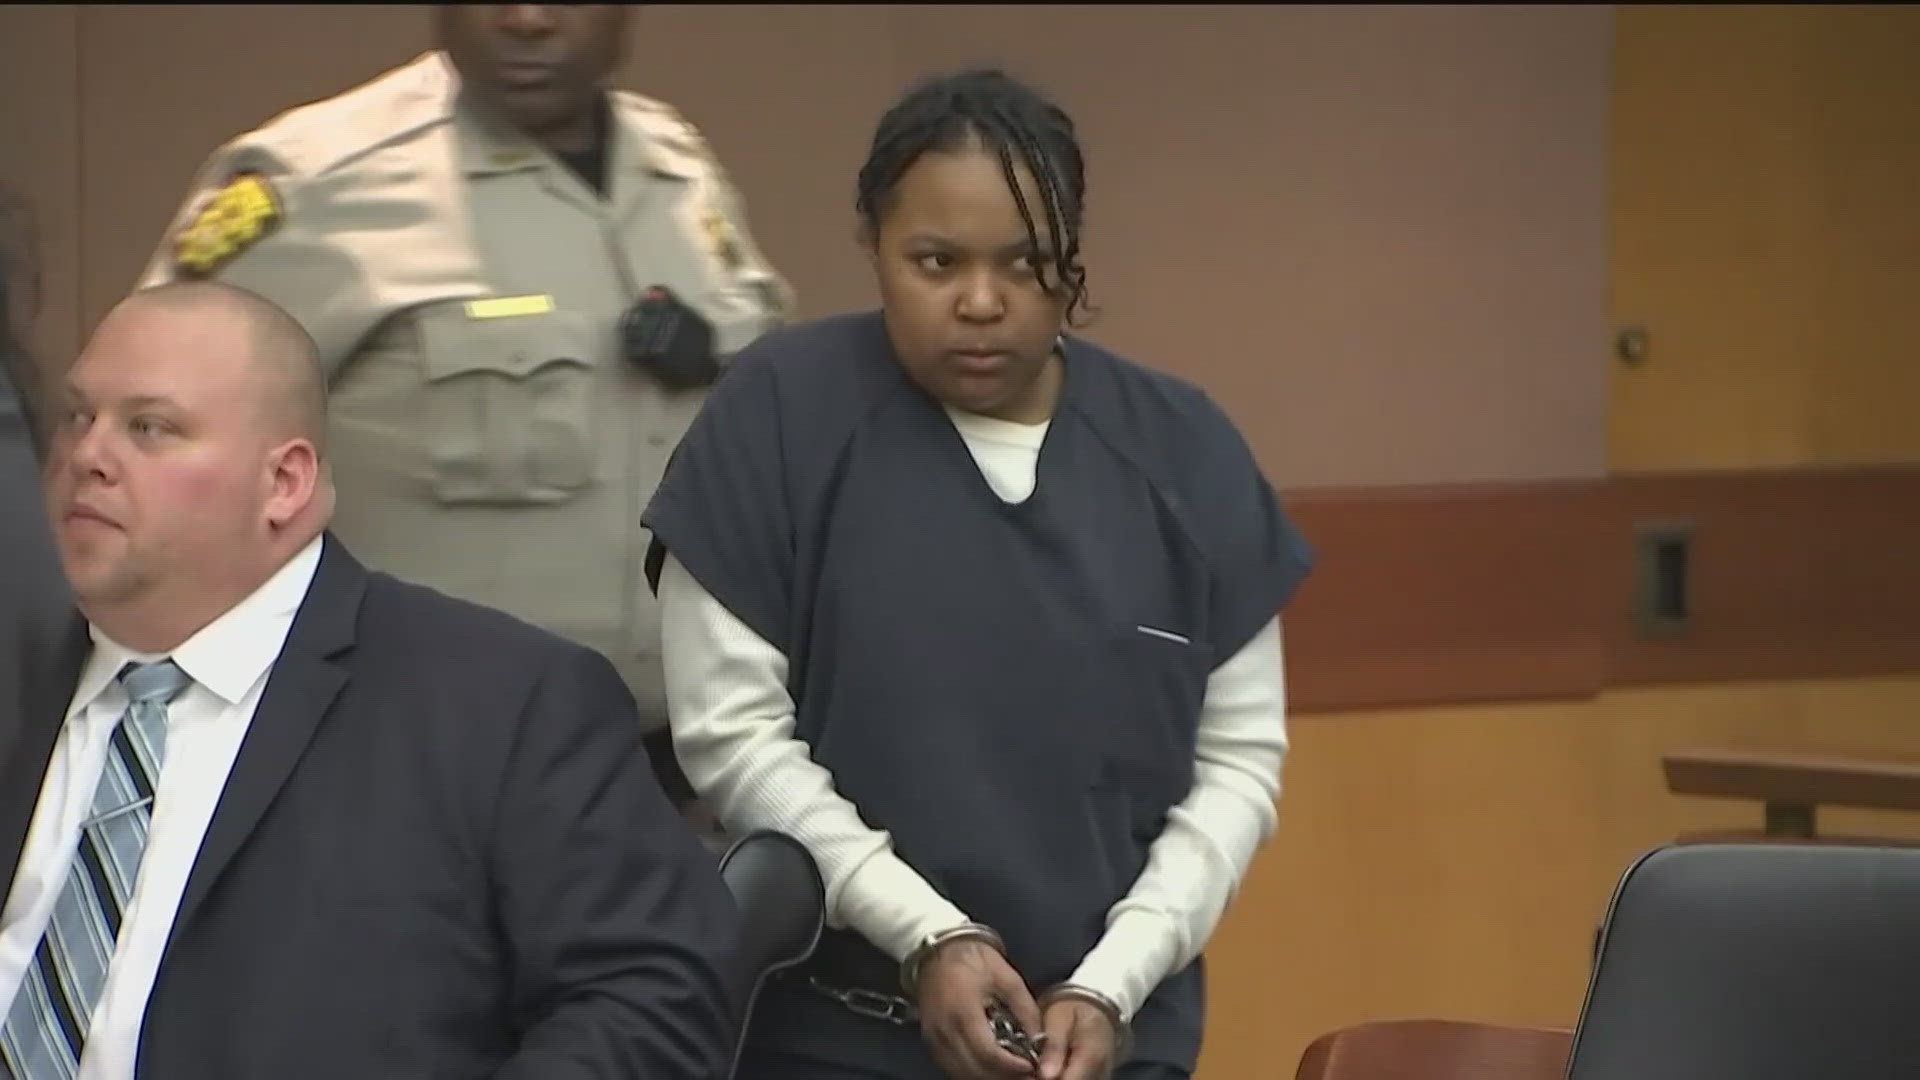 Lamora Williams was in the court room, but did not appear in front of the judge early Friday morning.